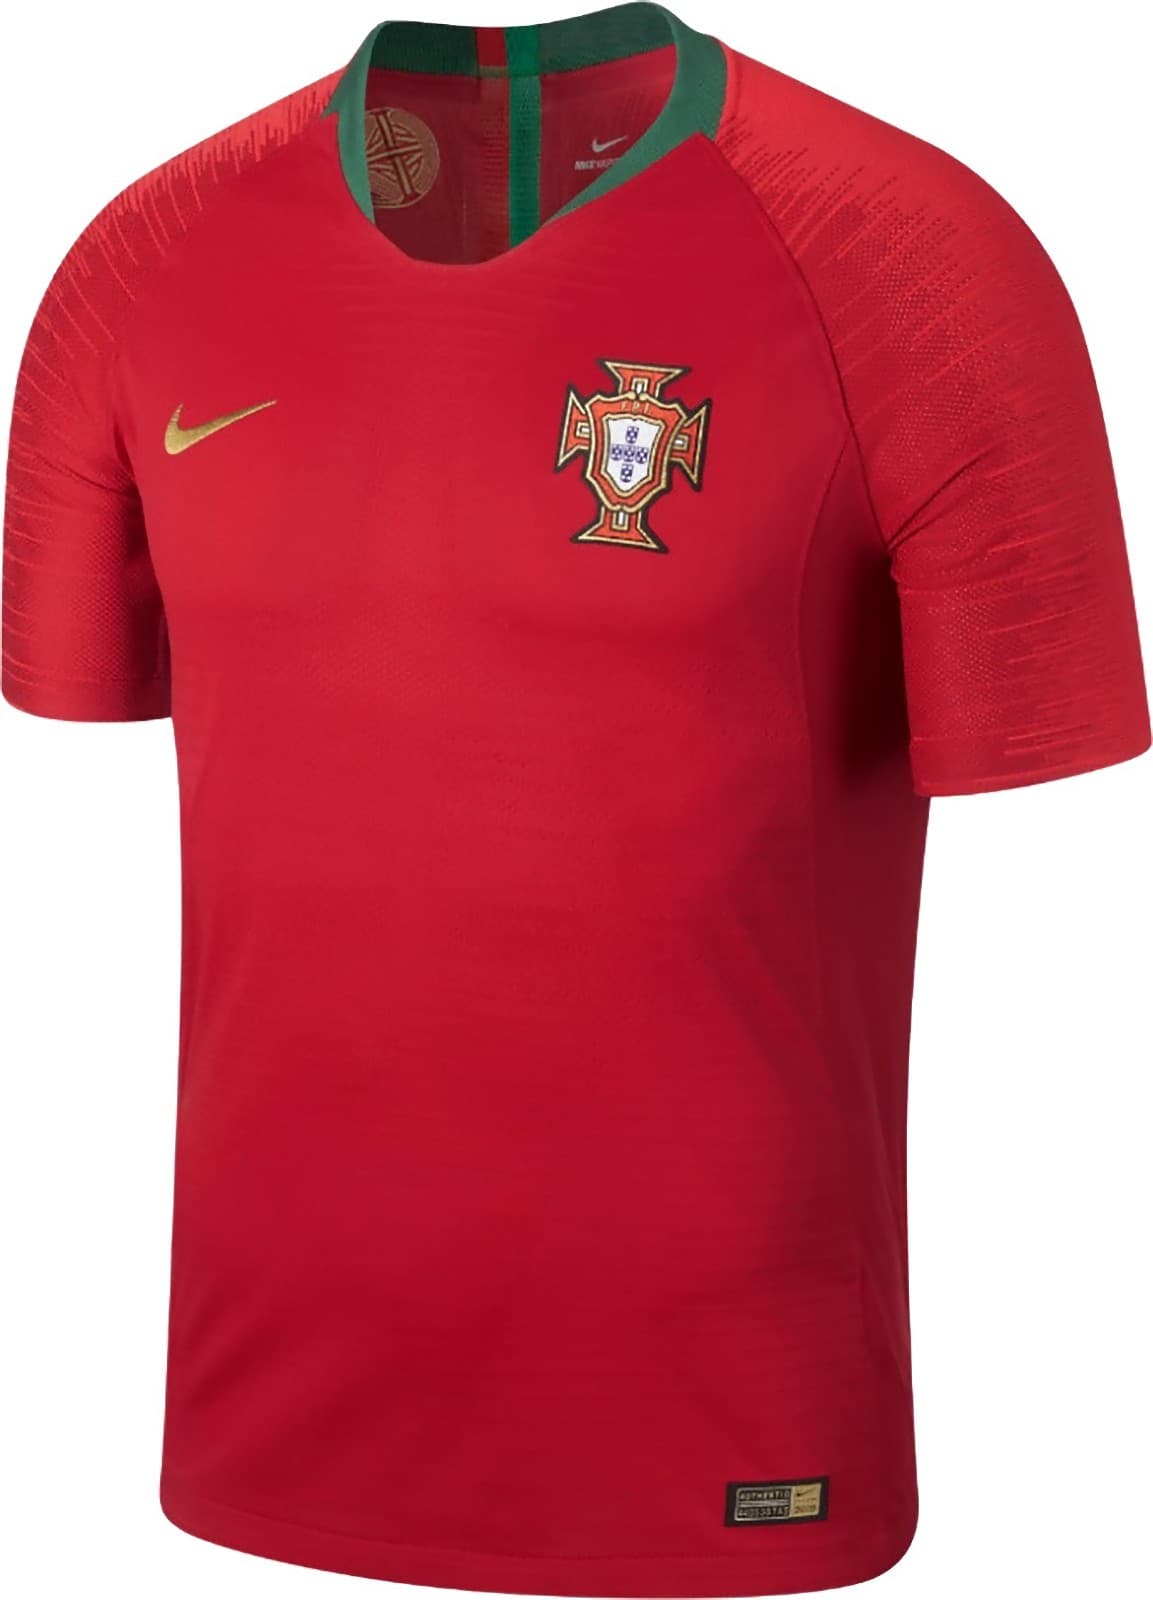 Portugal 2018 FIFA World Cup Kit